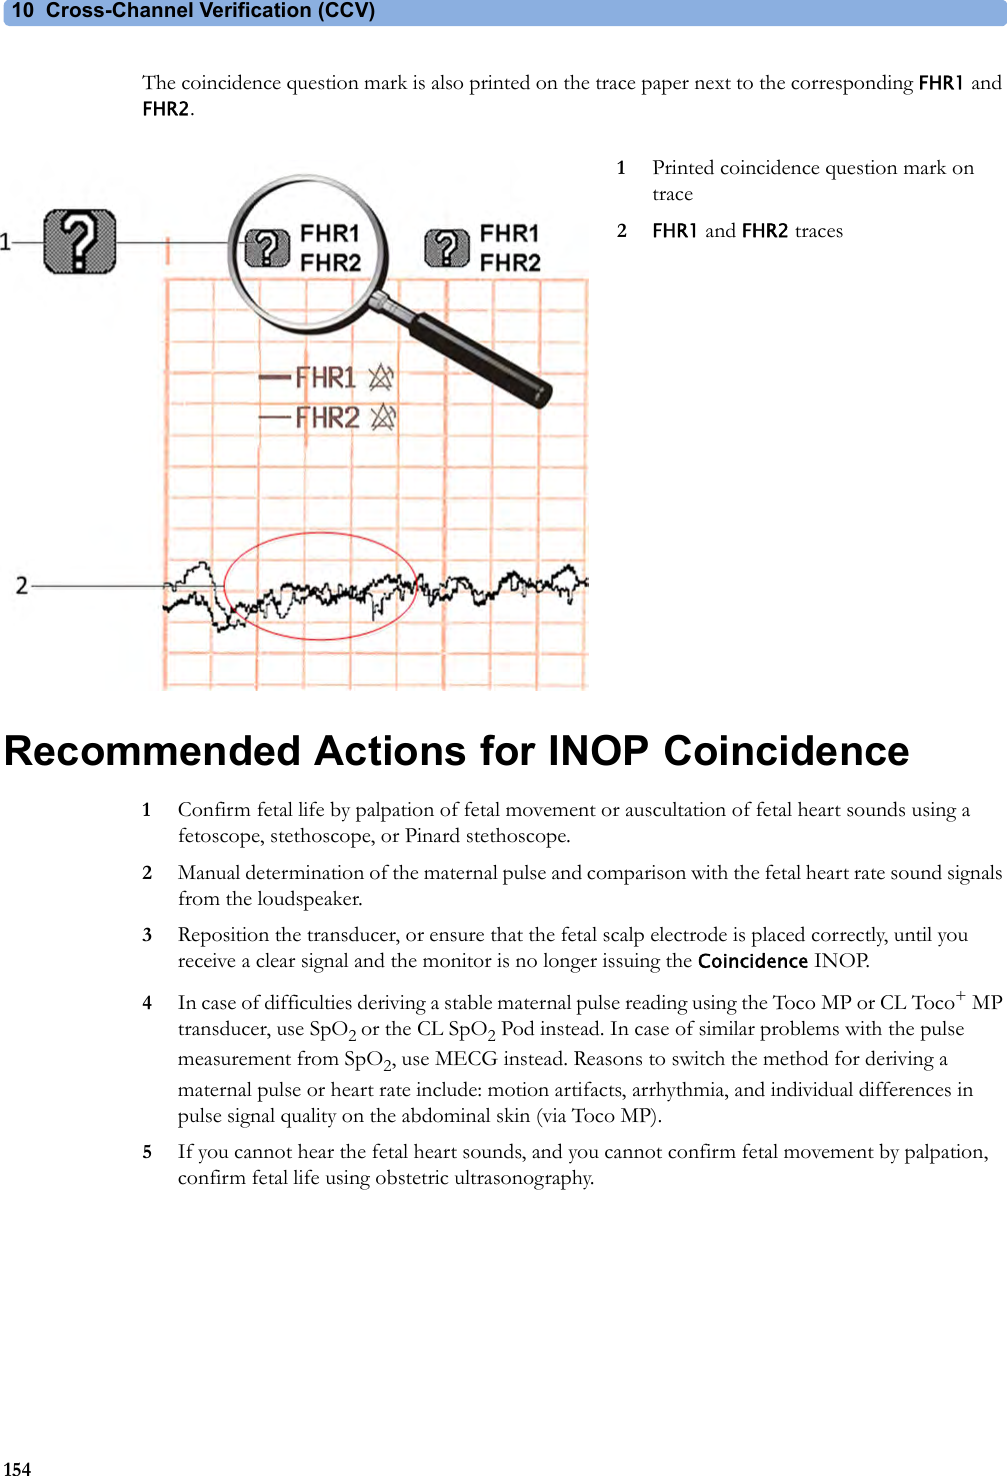 10 Cross-Channel Verification (CCV)154The coincidence question mark is also printed on the trace paper next to the corresponding FHR1 and FHR2.Recommended Actions for INOP Coincidence1Confirm fetal life by palpation of fetal movement or auscultation of fetal heart sounds using a fetoscope, stethoscope, or Pinard stethoscope.2Manual determination of the maternal pulse and comparison with the fetal heart rate sound signals from the loudspeaker.3Reposition the transducer, or ensure that the fetal scalp electrode is placed correctly, until you receive a clear signal and the monitor is no longer issuing the Coincidence INOP.4In case of difficulties deriving a stable maternal pulse reading using the Toco MP or CL Toco+MP transducer, use SpO2 or the CL SpO2 Pod instead. In case of similar problems with the pulse measurement from SpO2, use MECG instead. Reasons to switch the method for deriving a maternal pulse or heart rate include: motion artifacts, arrhythmia, and individual differences in pulse signal quality on the abdominal skin (via Toco MP).5If you cannot hear the fetal heart sounds, and you cannot confirm fetal movement by palpation, confirm fetal life using obstetric ultrasonography.1Printed coincidence question mark on trace2FHR1 and FHR2 traces